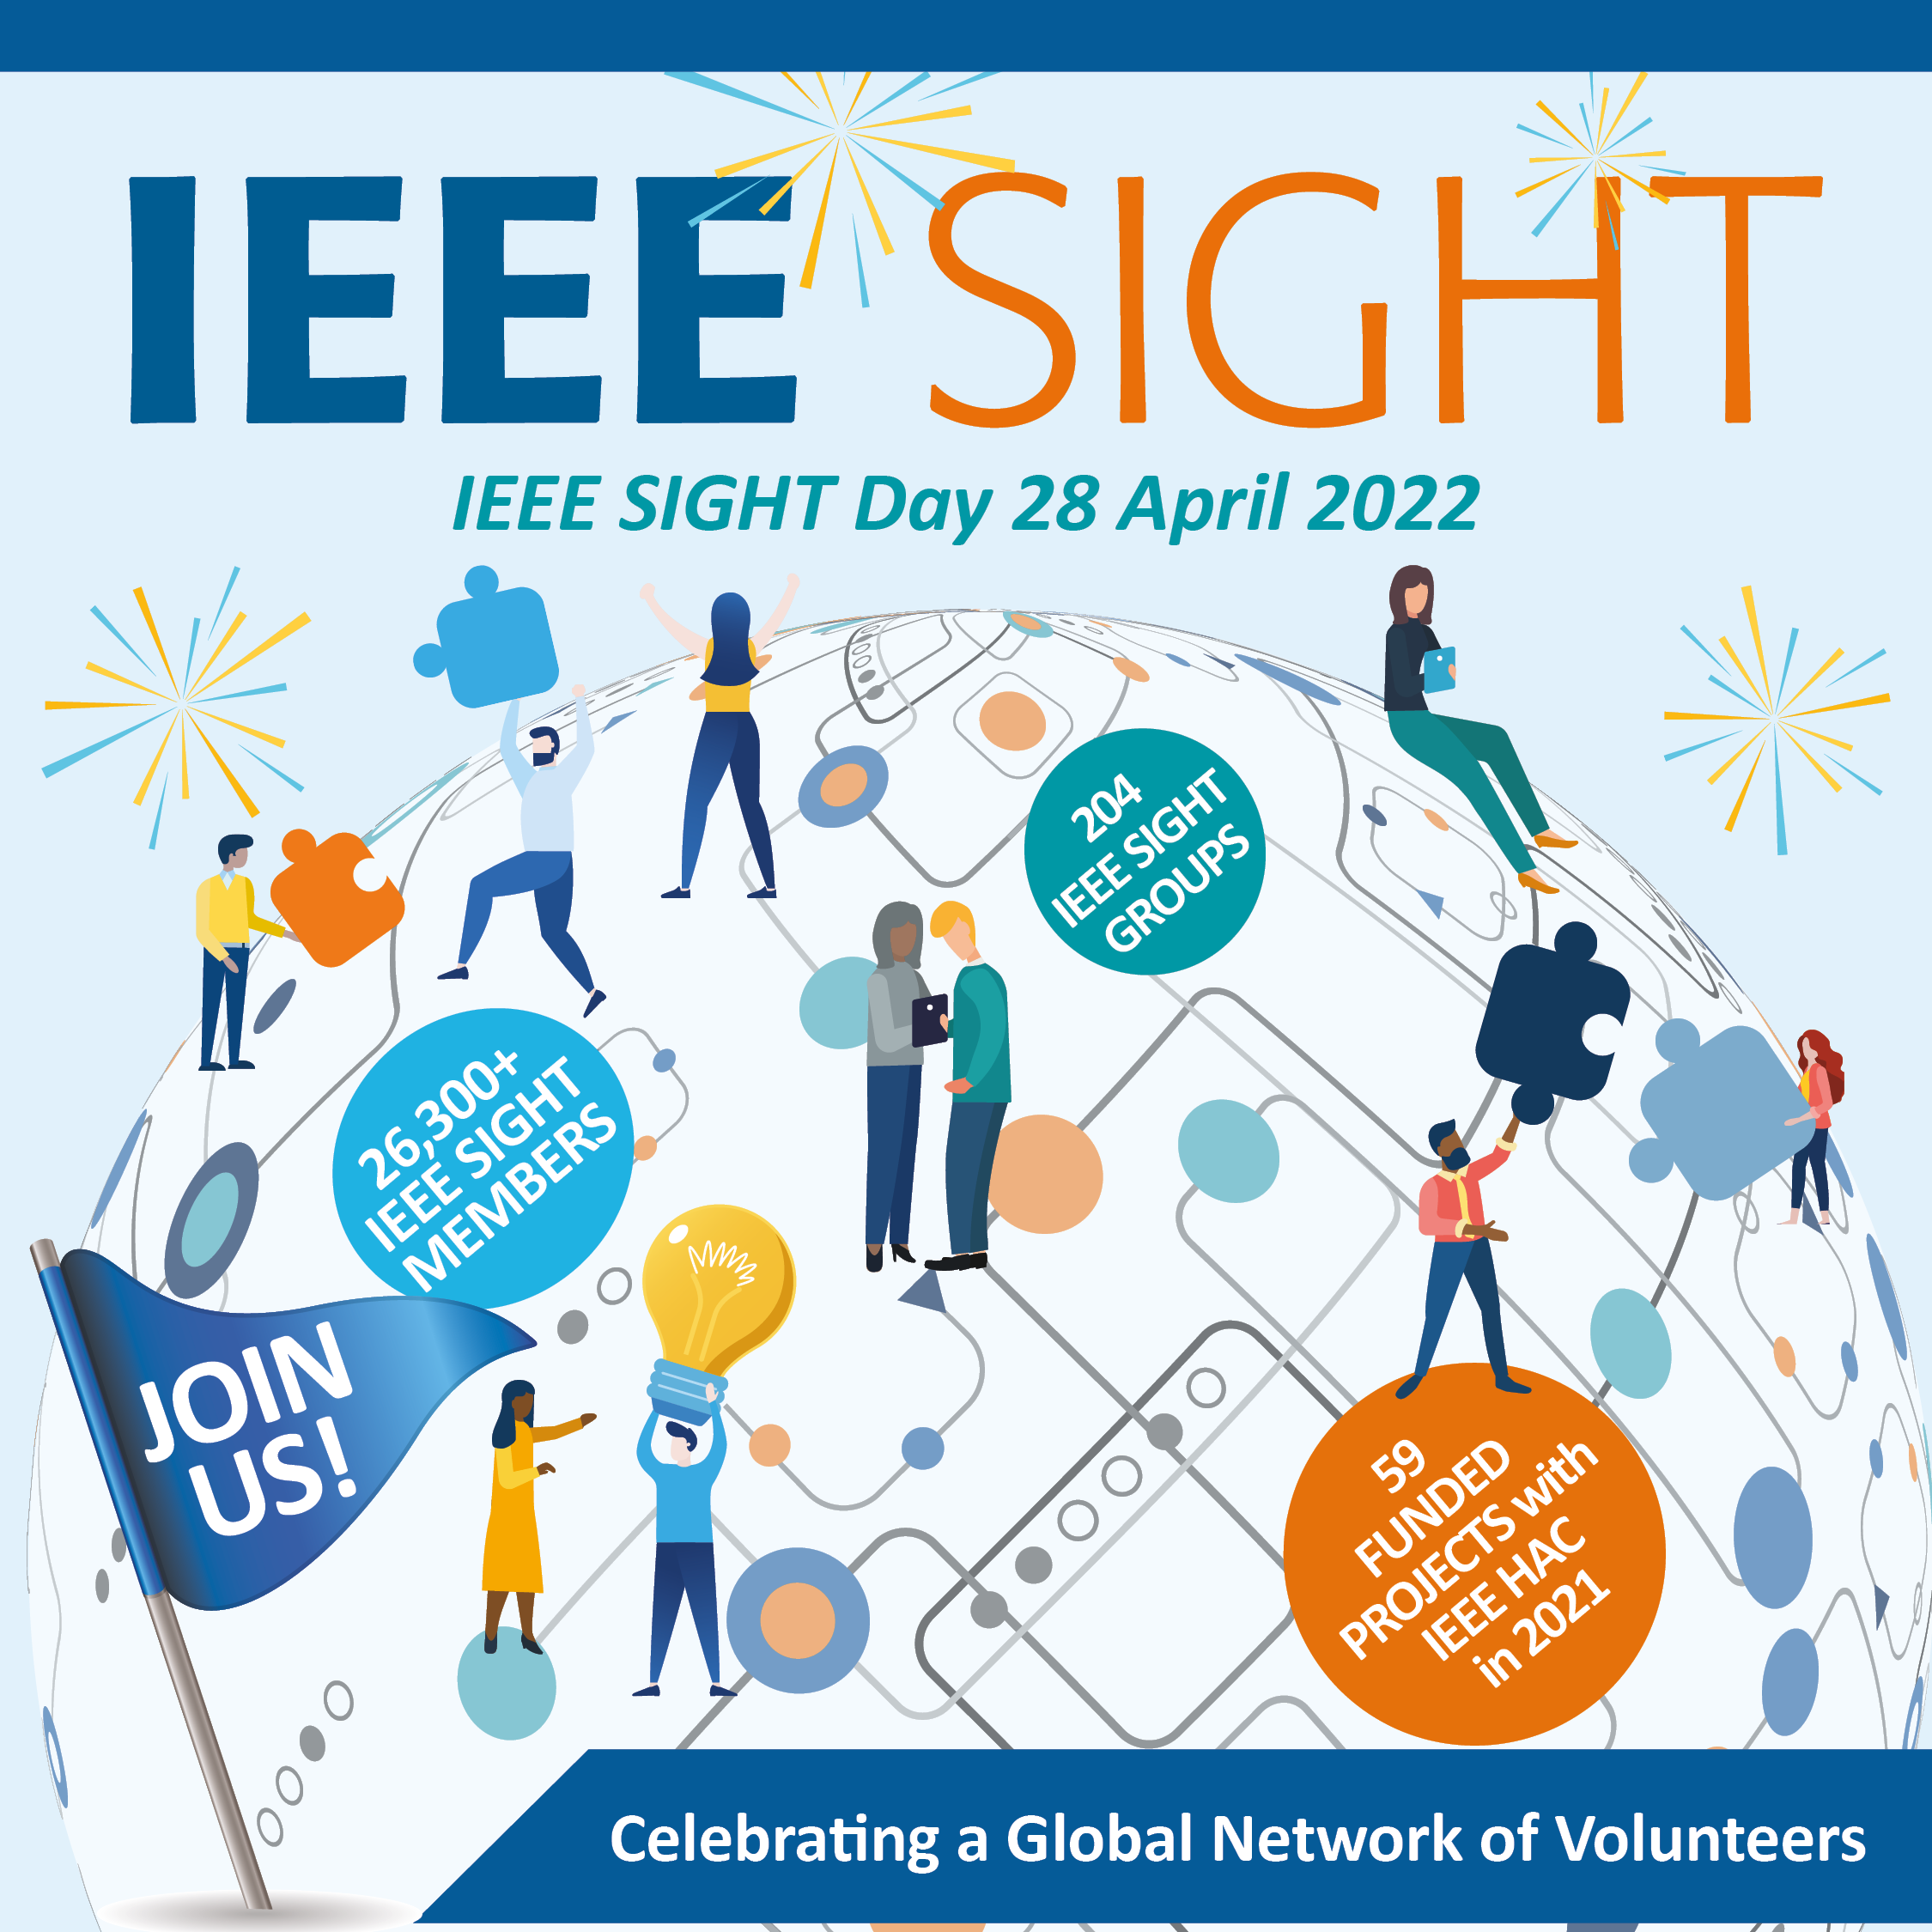 IEEE SIGHT Day 2022